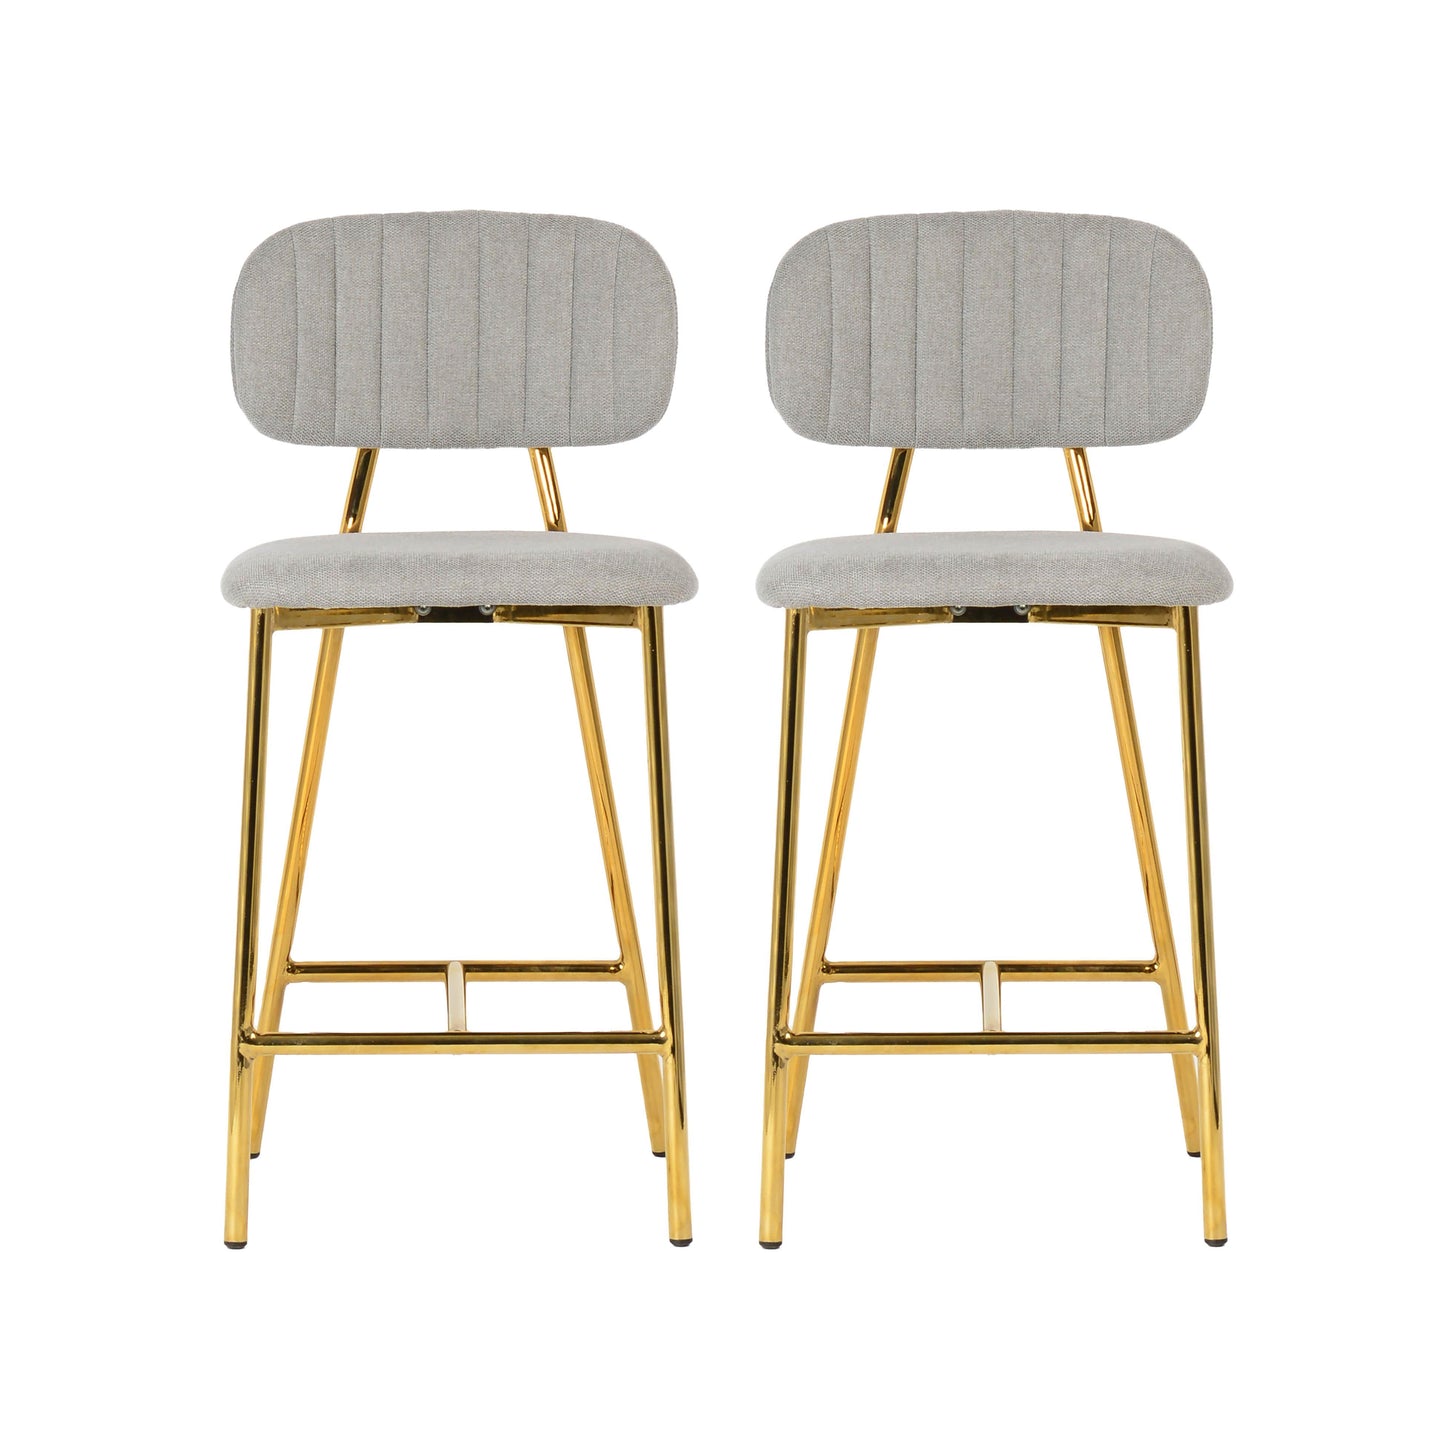 Ariana Grey Counter Stool Set of 2 by TOV